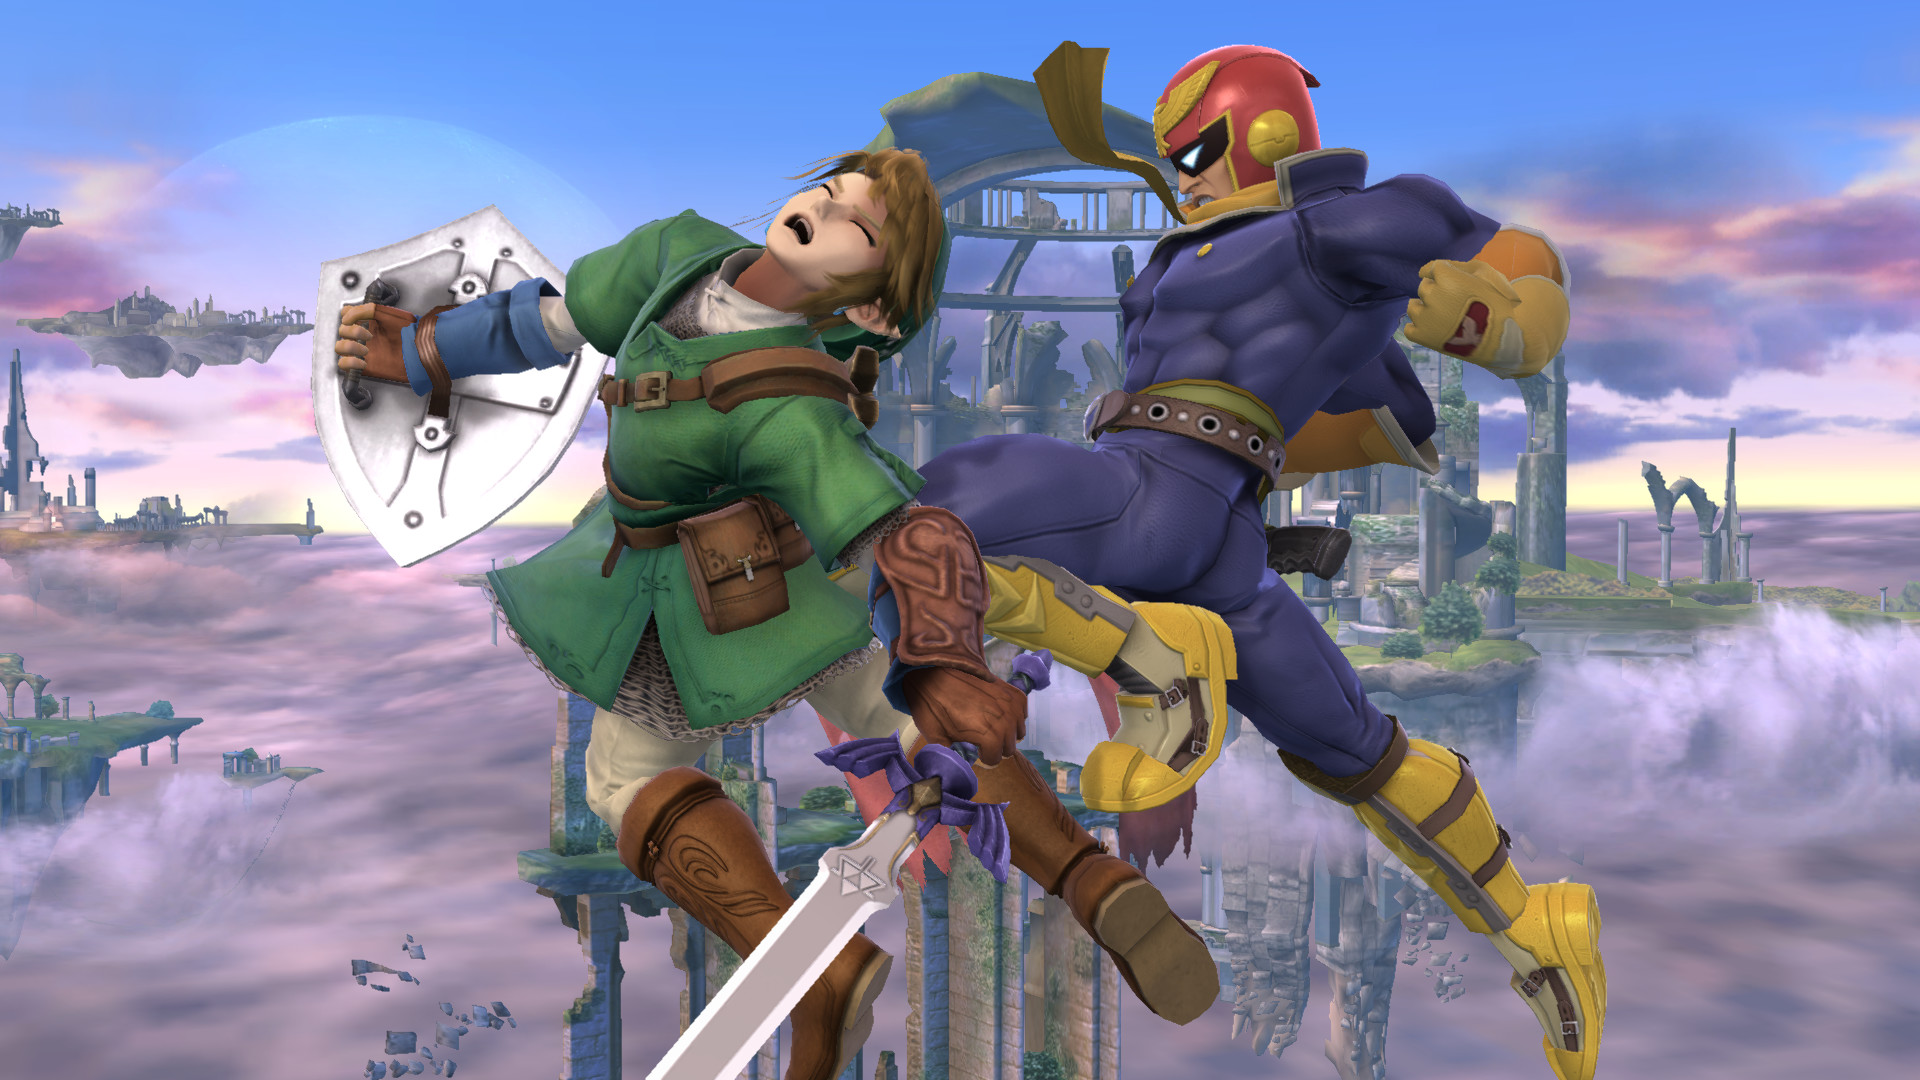 1920x1080 Ganondorf should get a Captain Falcon costume - Hyrule Warriors Message  Board for Wii U - GameFAQs